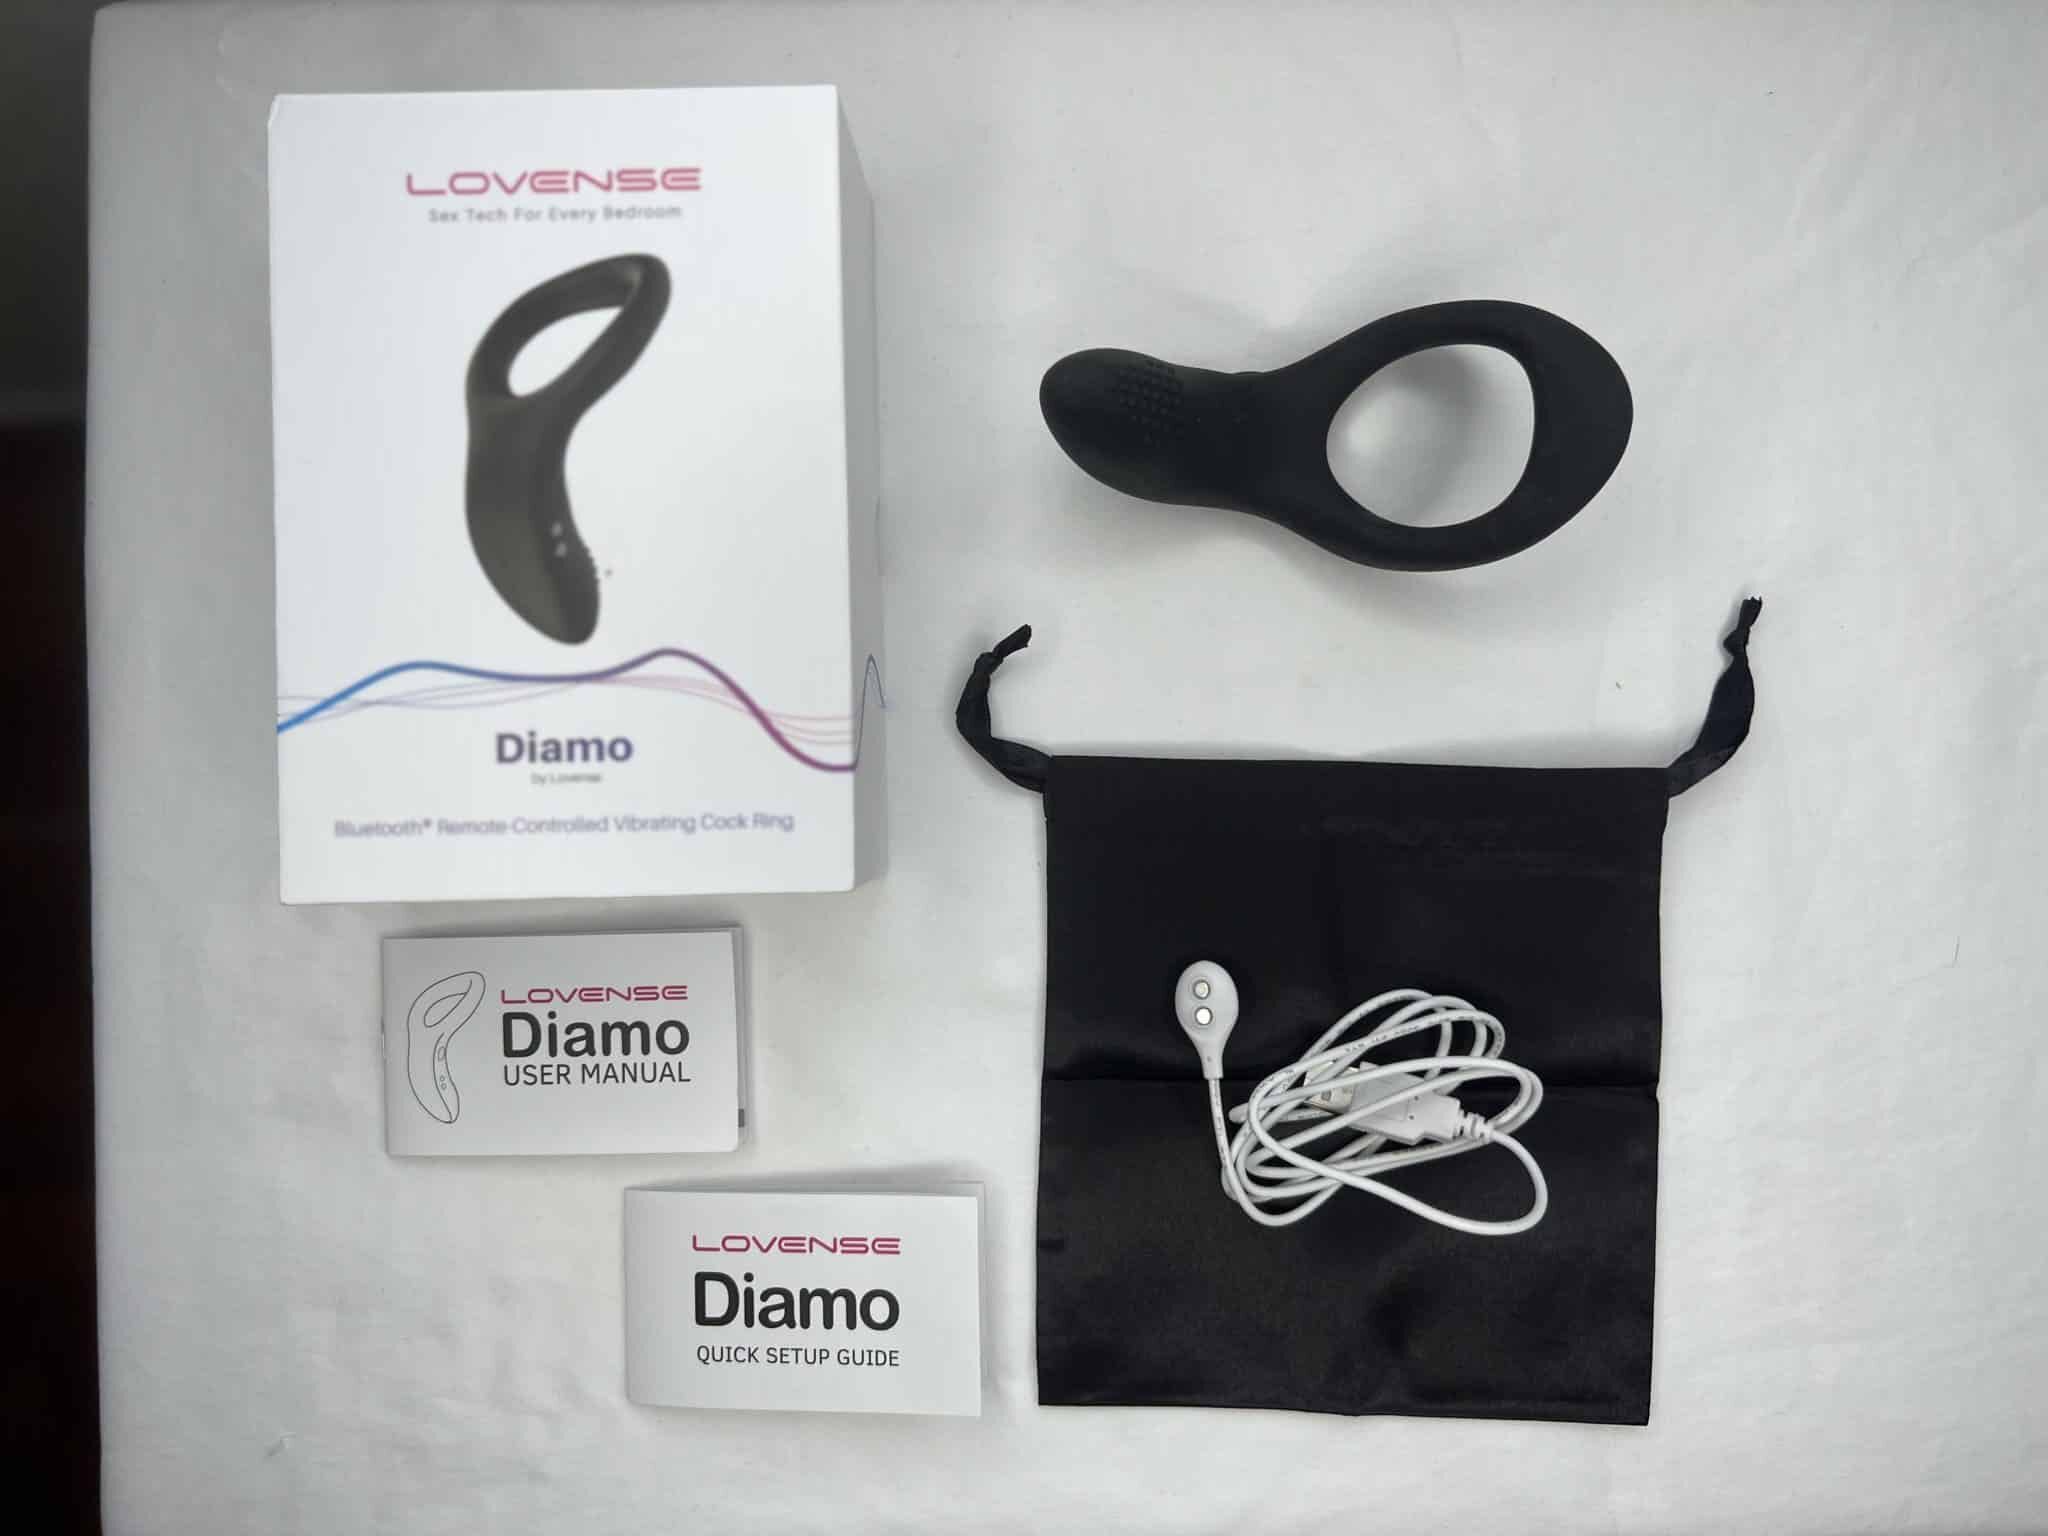 Specifications and features Lovense Diamo